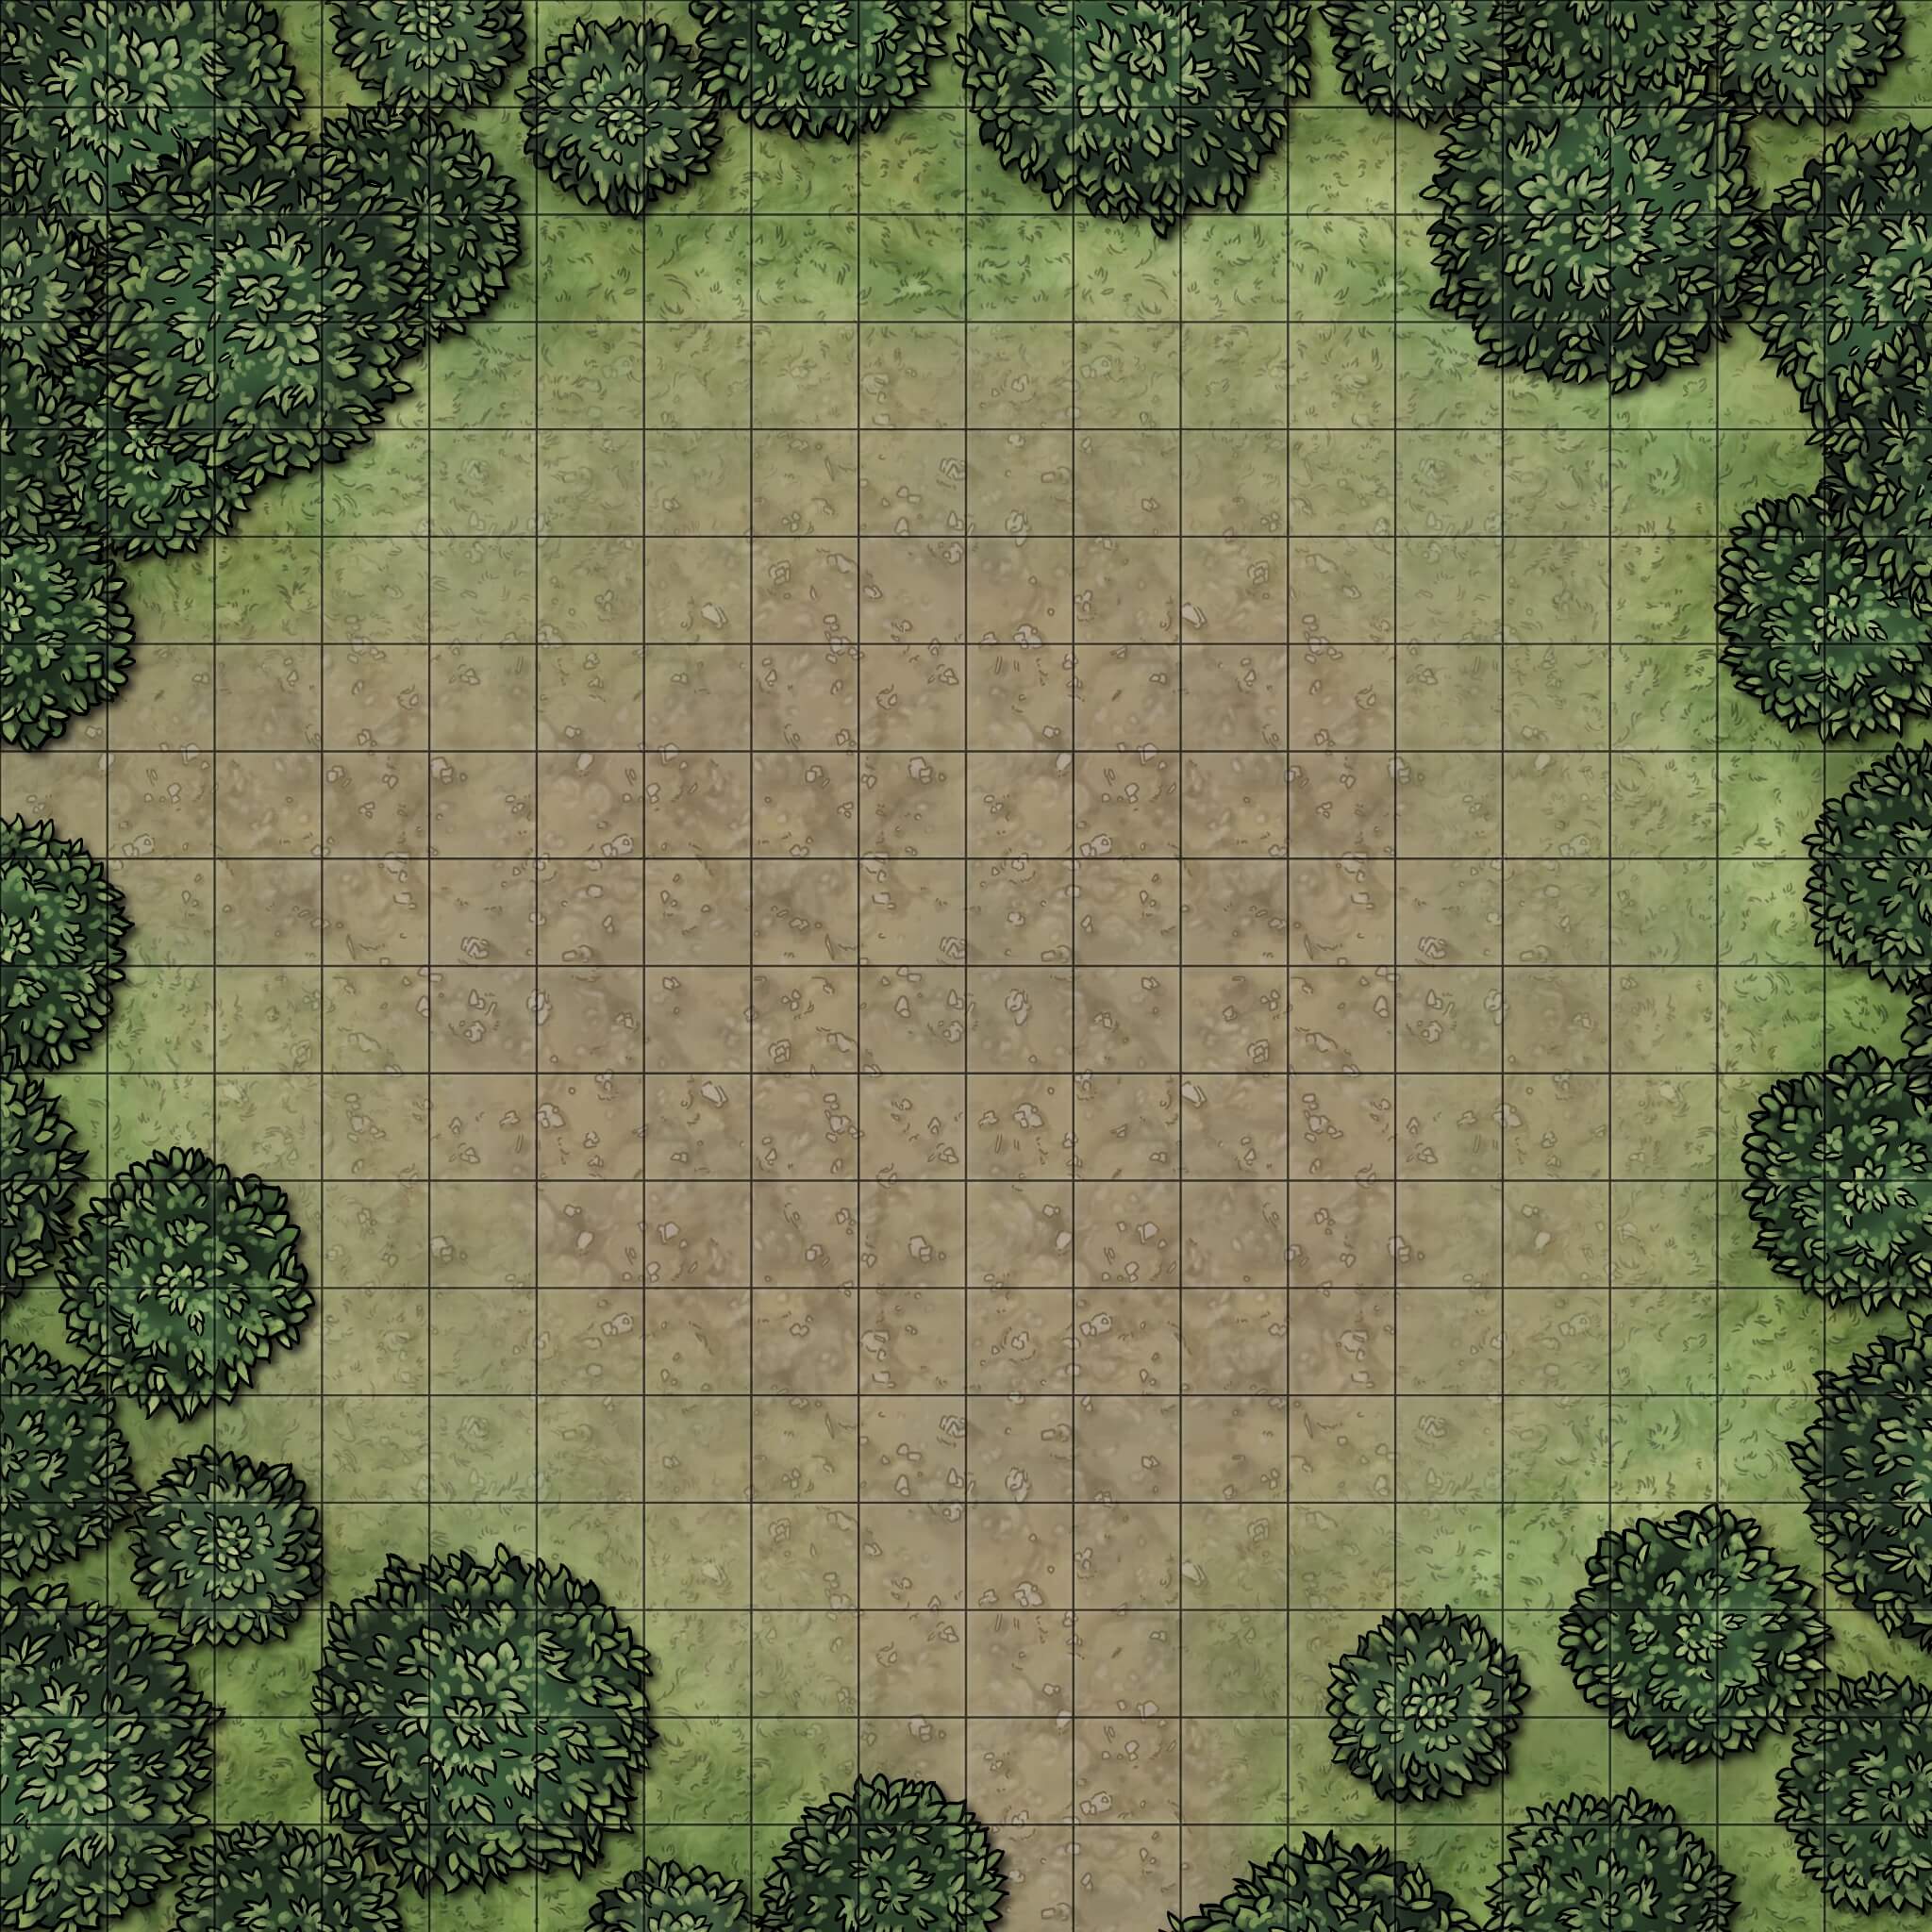 Forest Clearing Map